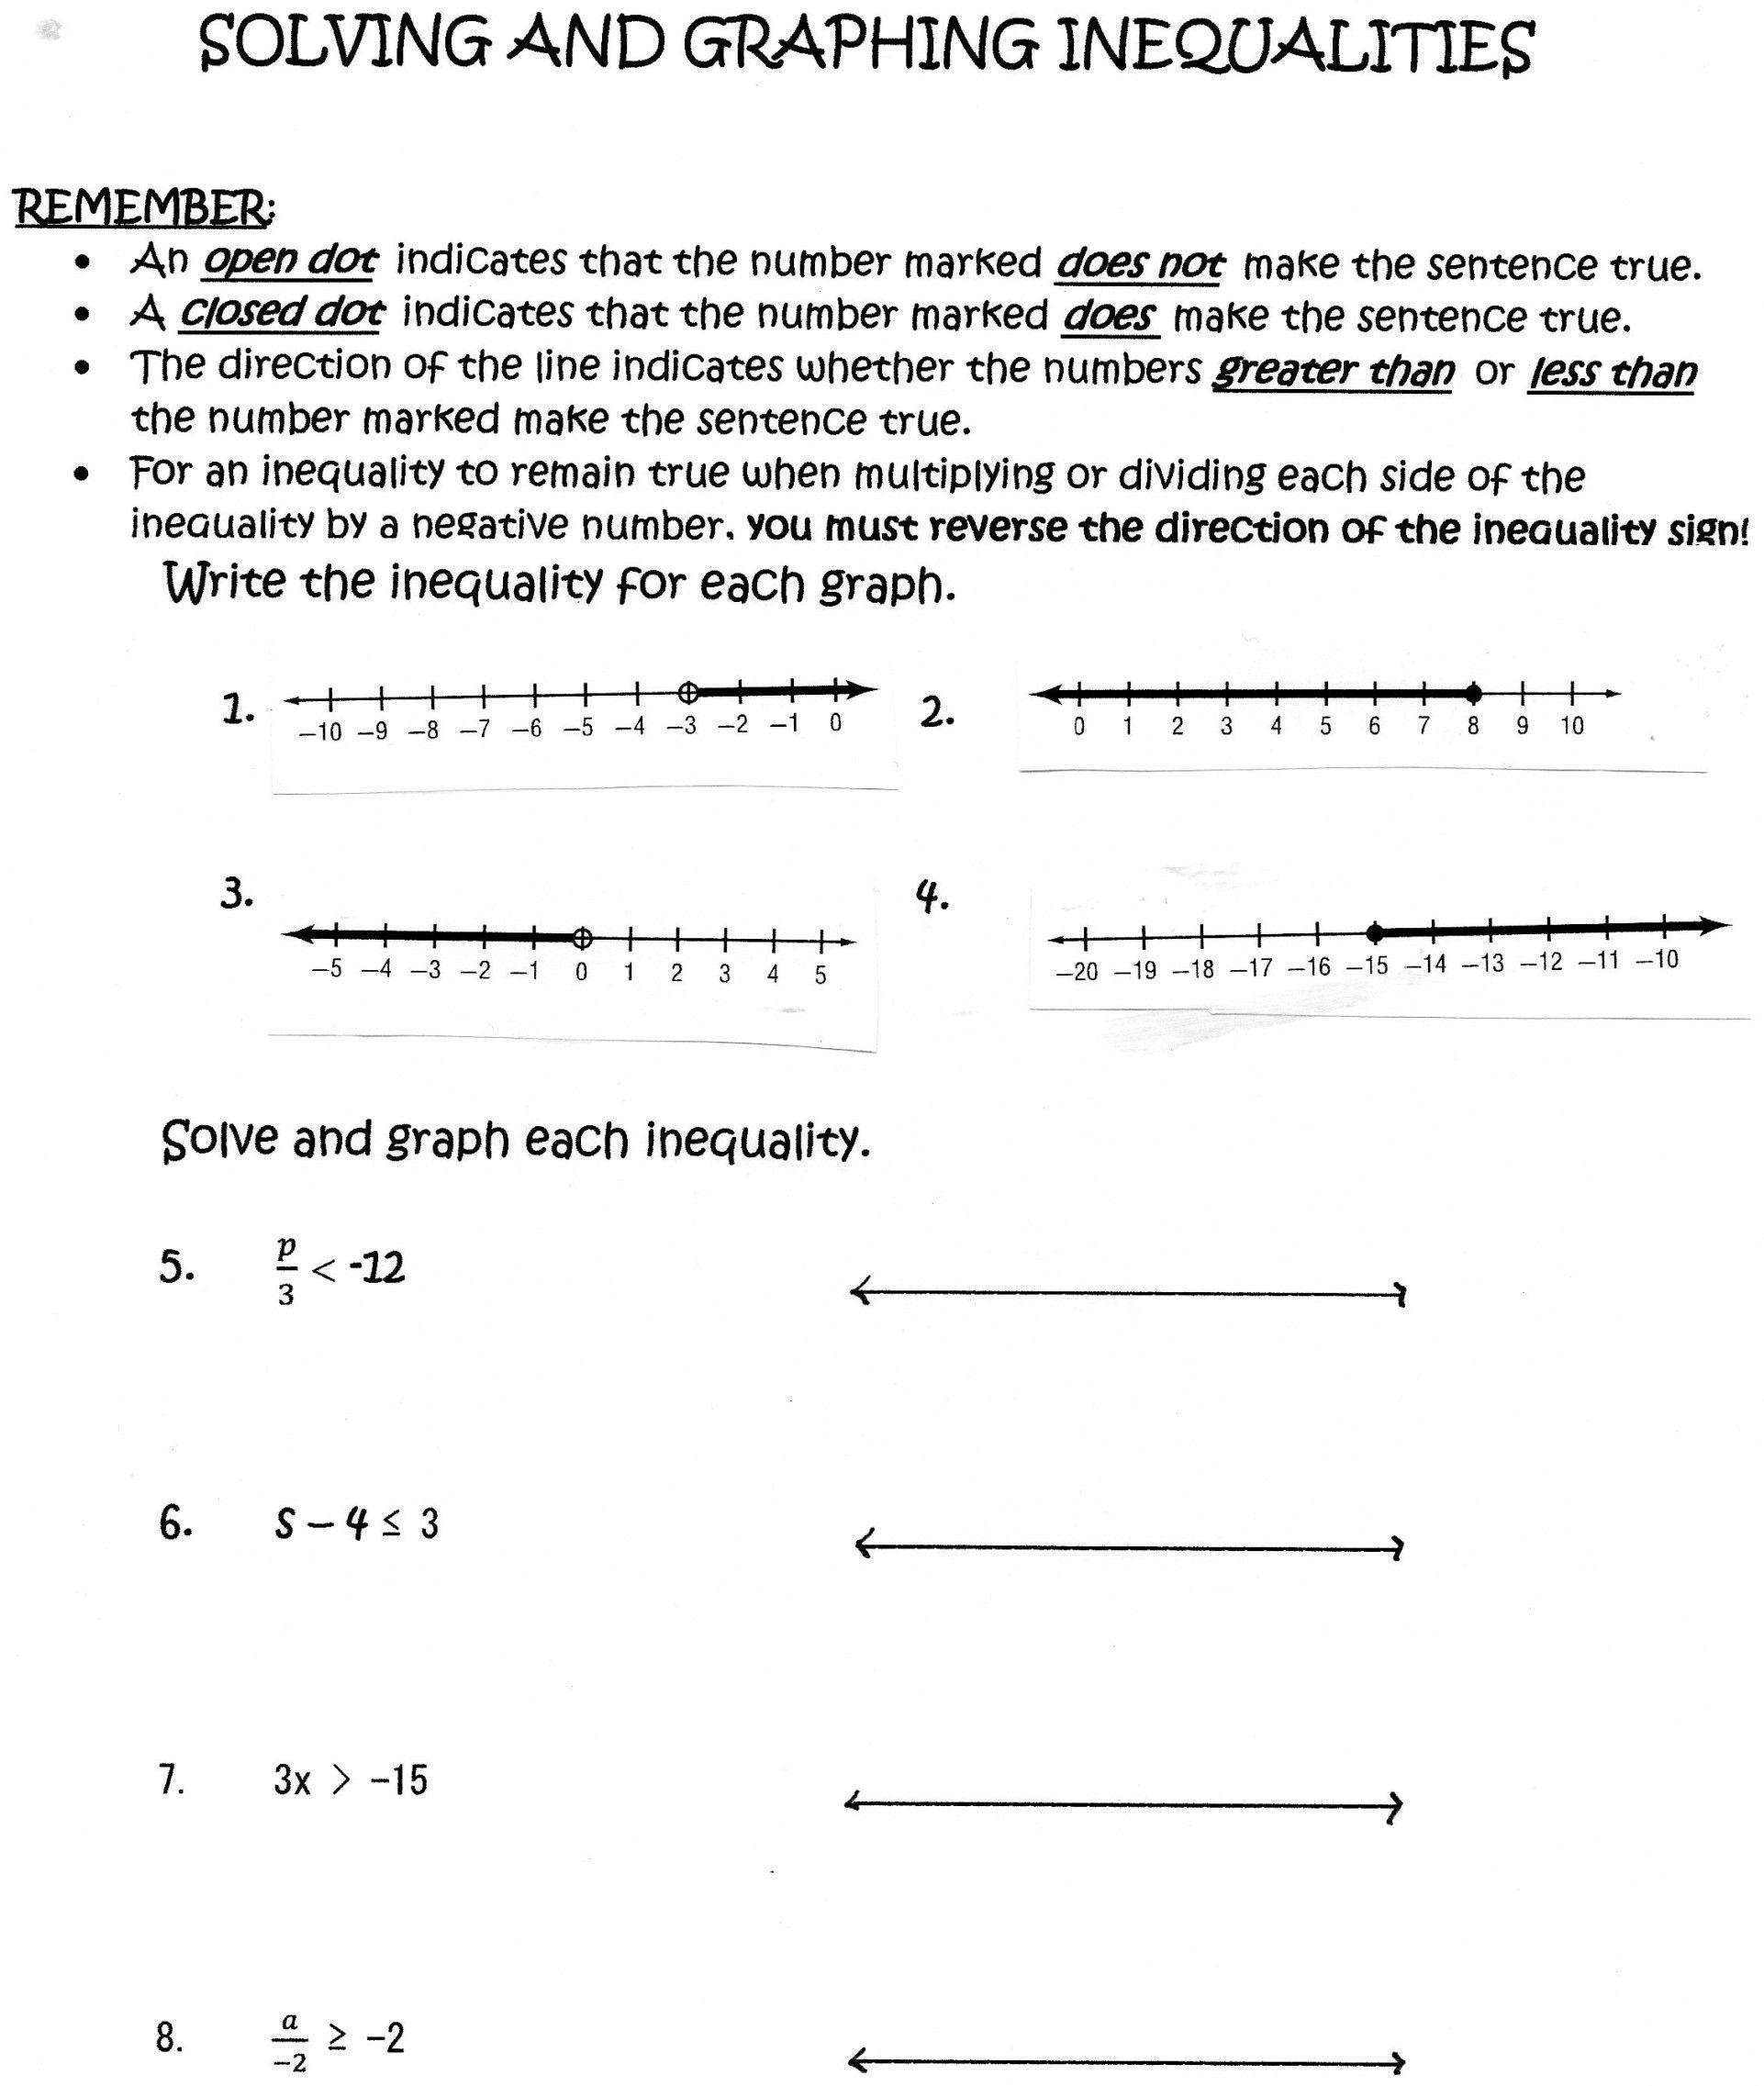 Solving And Graphing Inequalities Worksheet Answer Key — db-excel.com